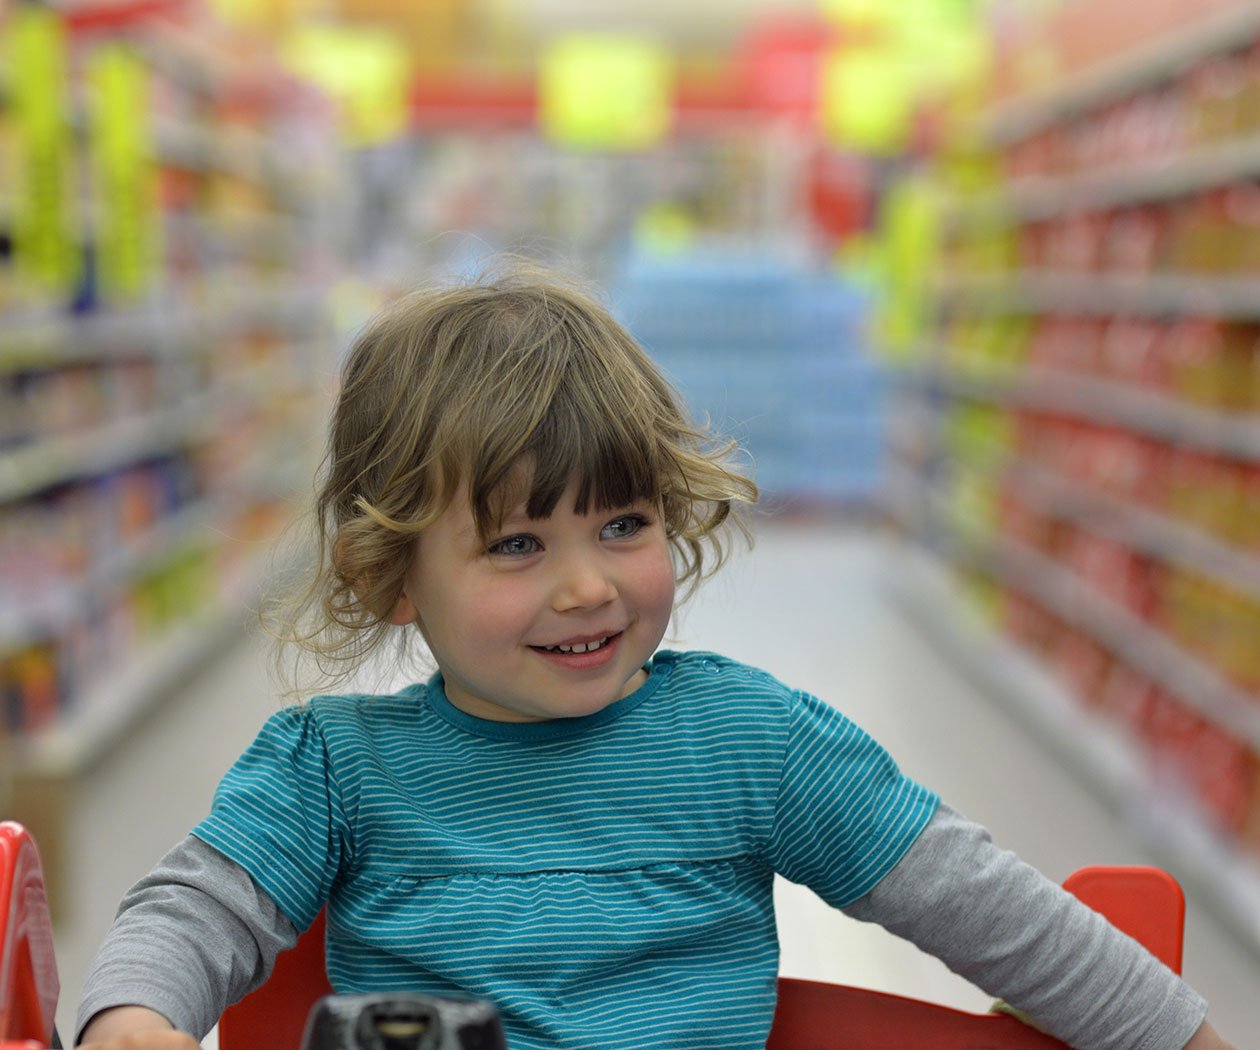 A photo of a little girl in a shopping cart to illustrate environment where products from Remedi food and beverage clients are sold.